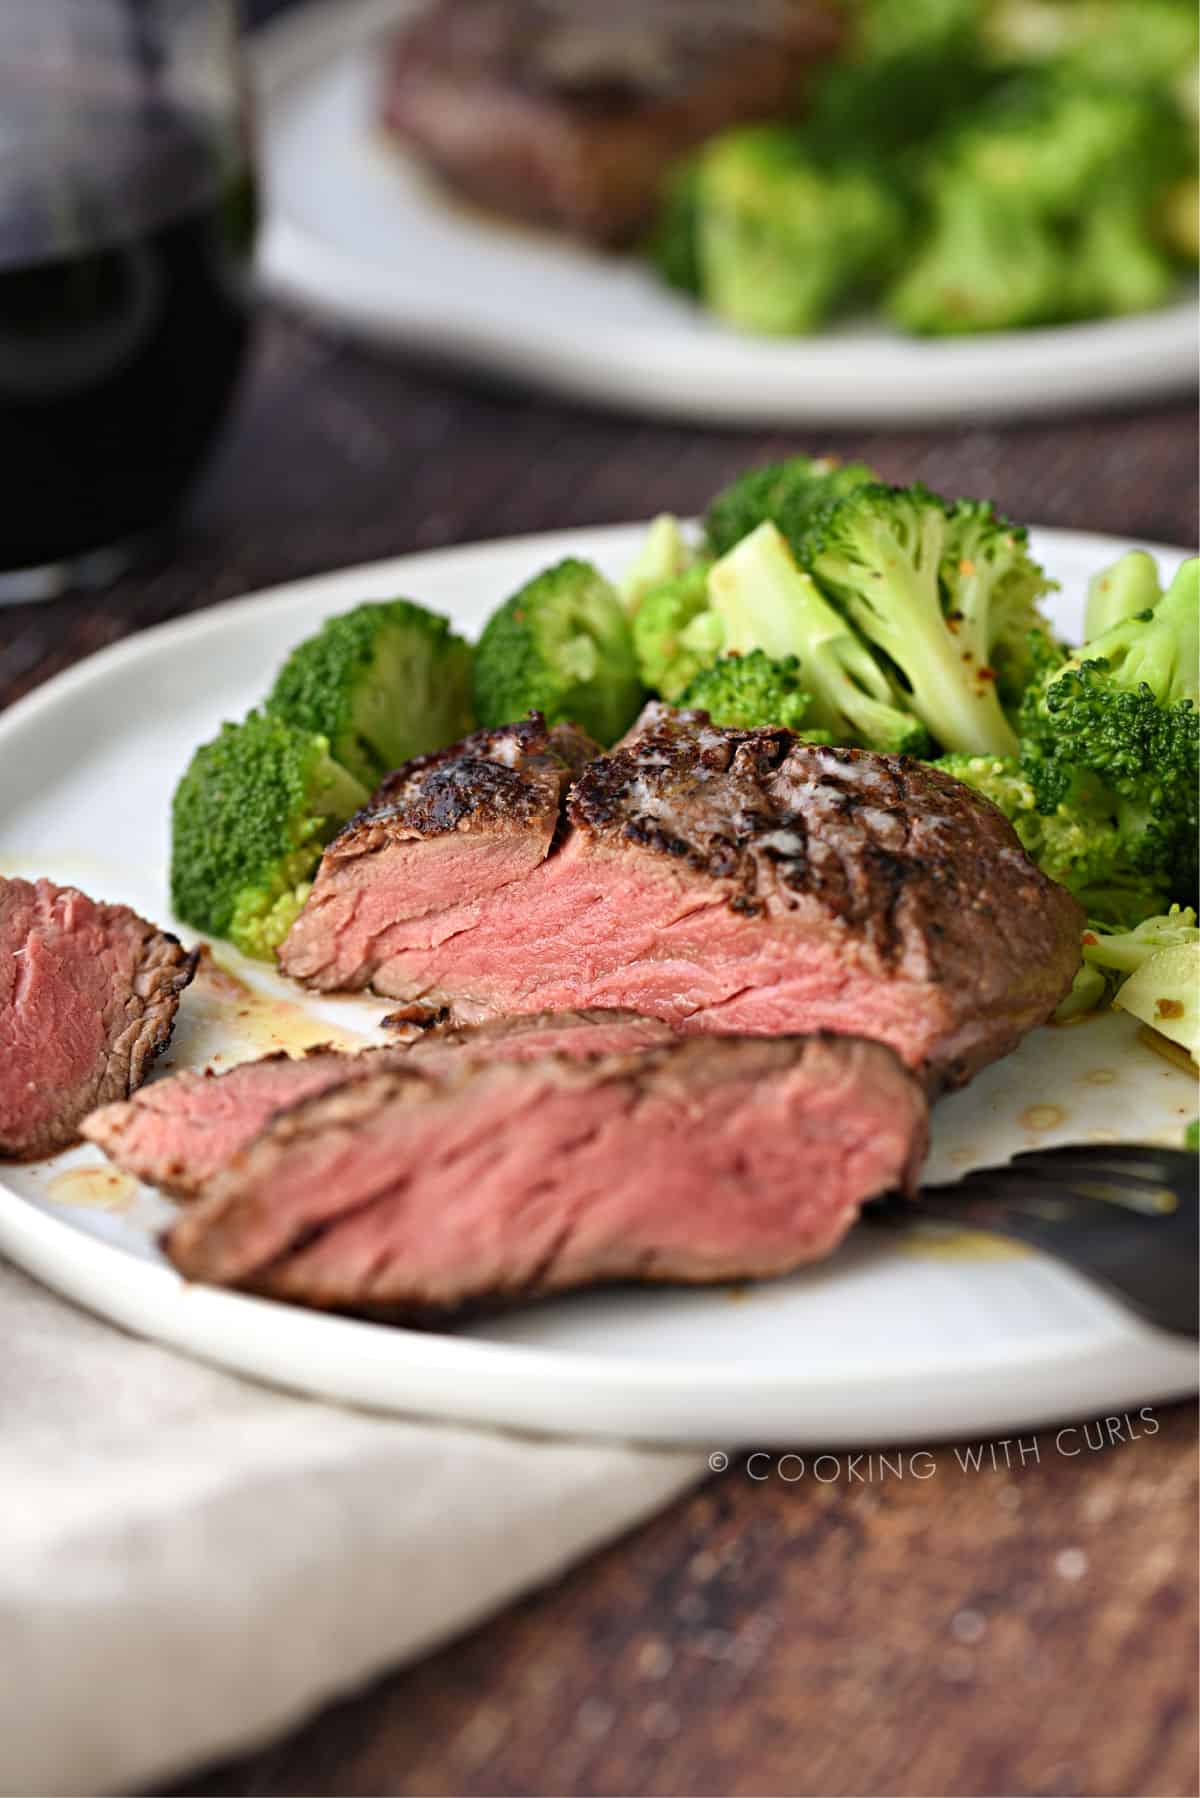 sliced filet mignon on a white plate with broccoli florets, with a second place and a glass of red wine in the background.